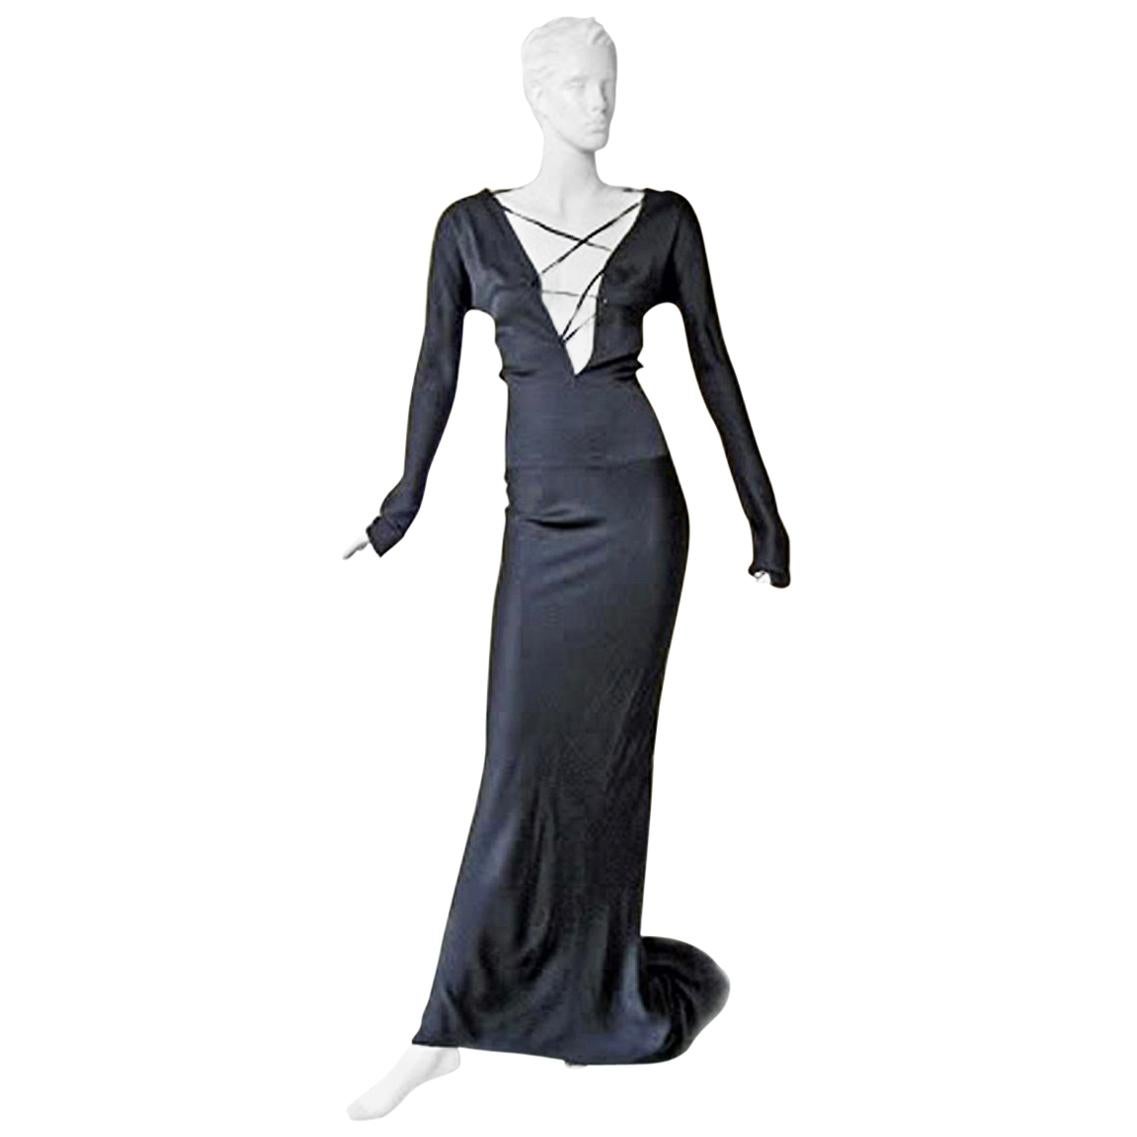 Gucci by Tom Ford 2002 Helen Hunt Dress Gown Worn on Red Carpet NWT!